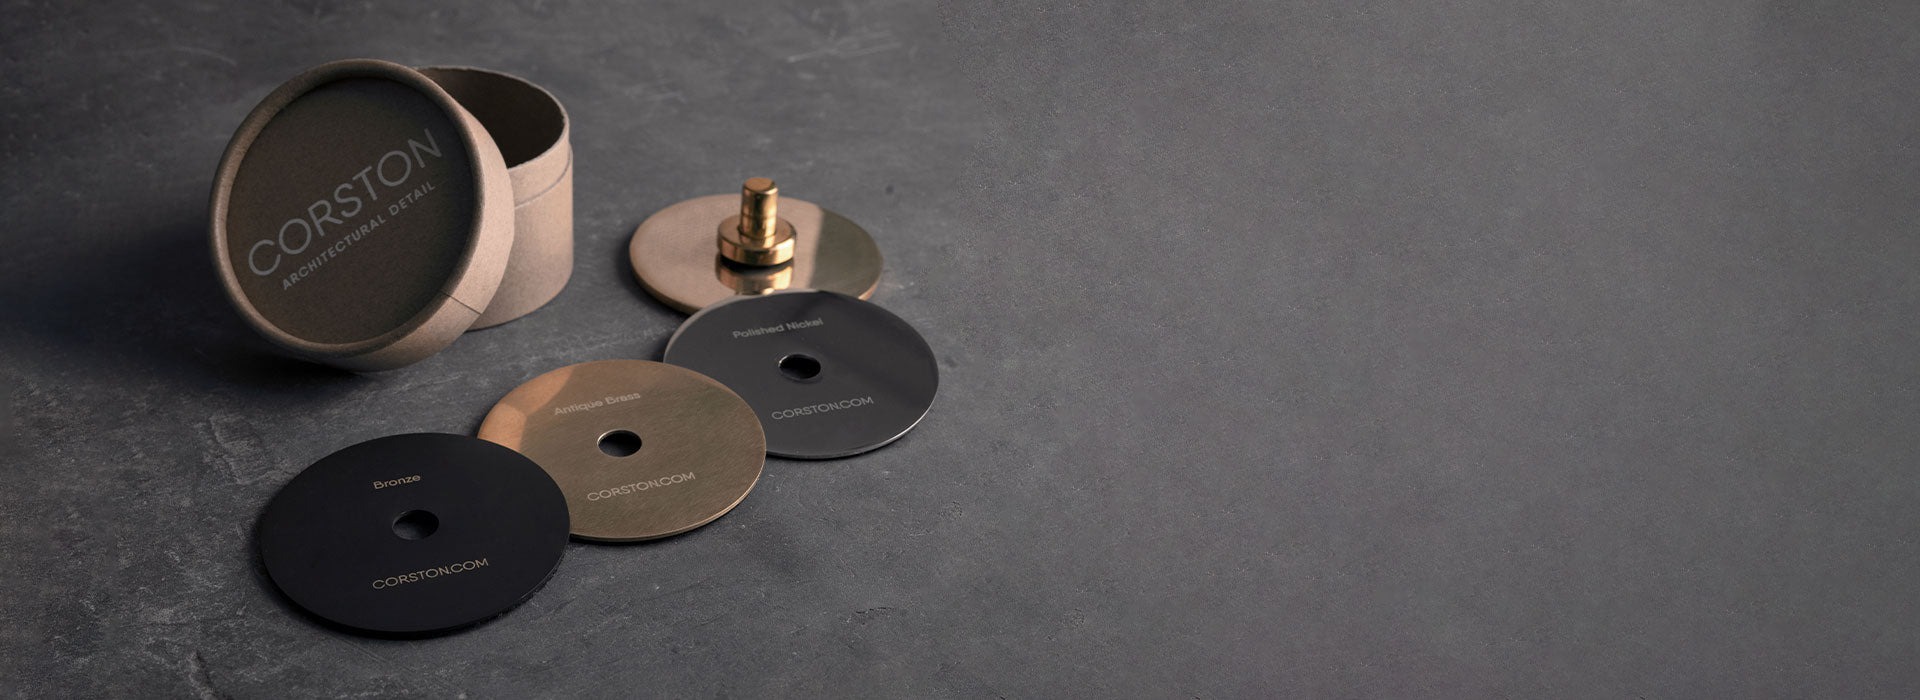 Corston sample finishes in bronze, antique brass, unlacquered brass and polished nickel